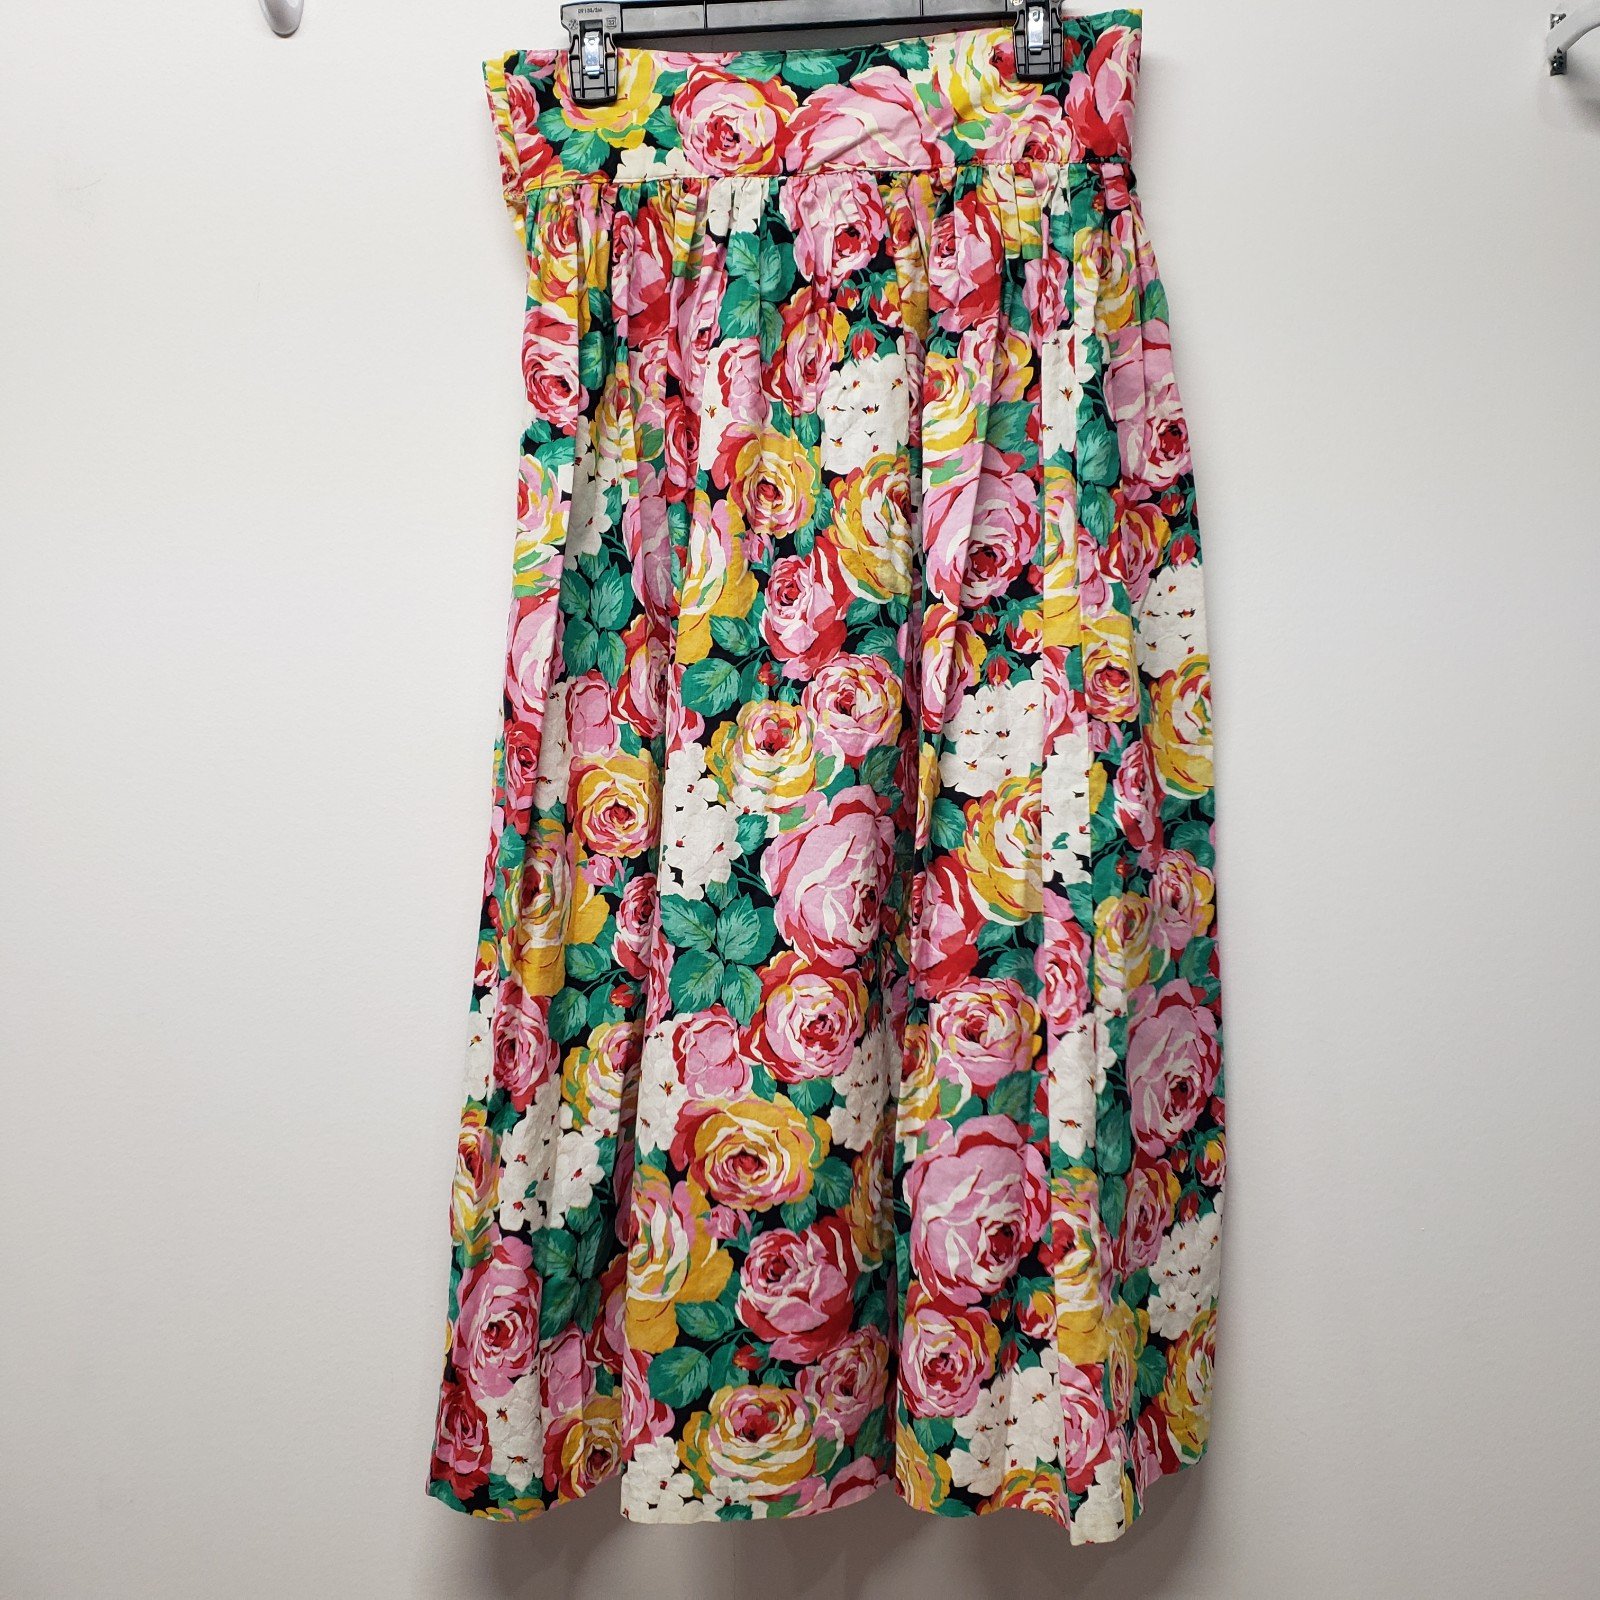 good price Vintage Cotton Floral Midi Skirt Colorful Side Closure Made in USA oJZIhHQ6b best sale